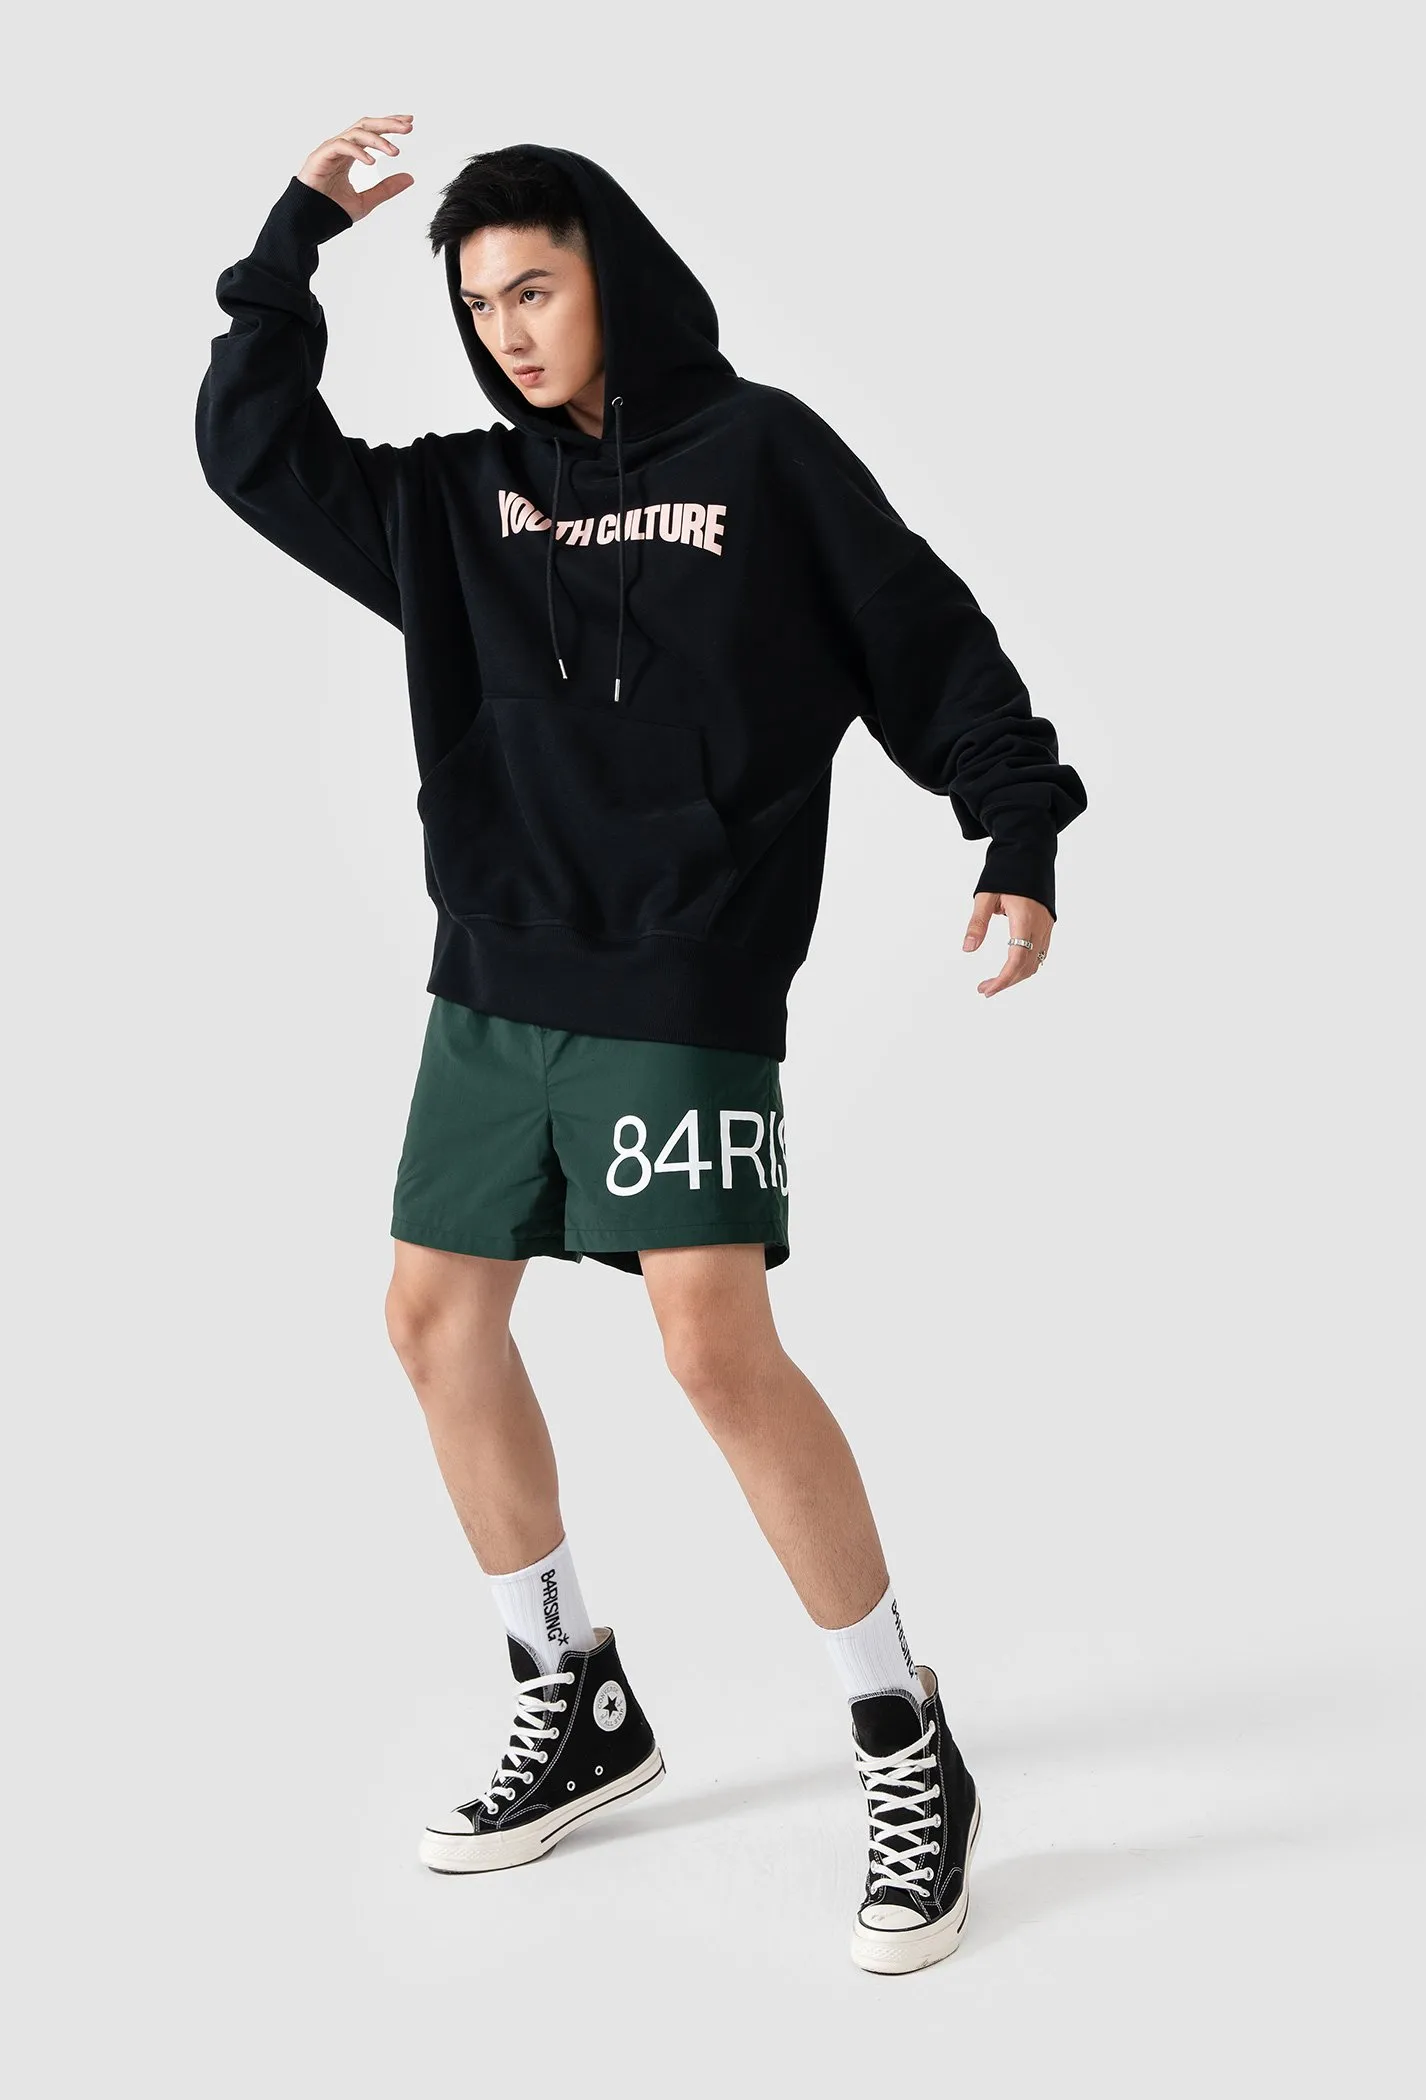 Áo Hoodie Oversize 84RISING YOUTH CULTURE  3